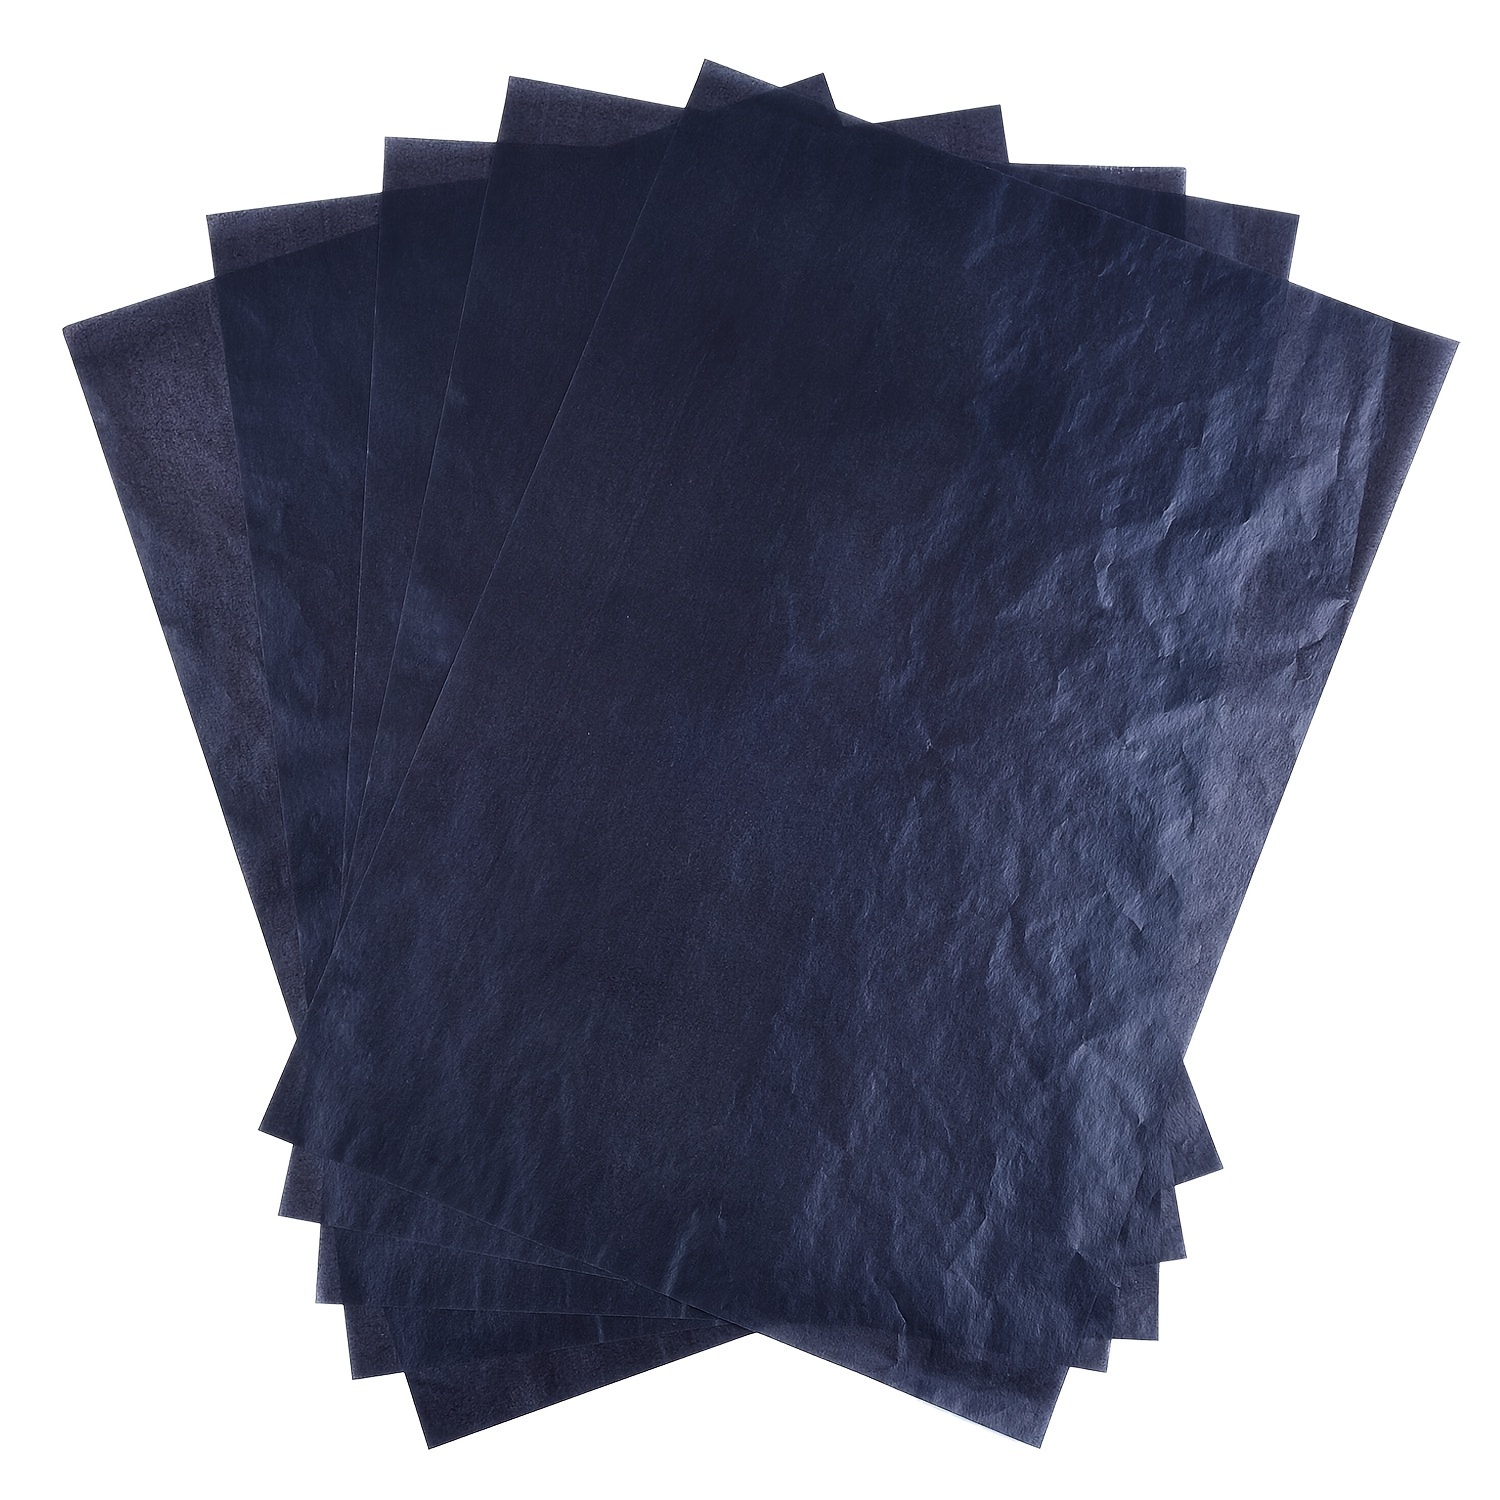  Blue Carbon Paper For Tracing Graphite Transfer